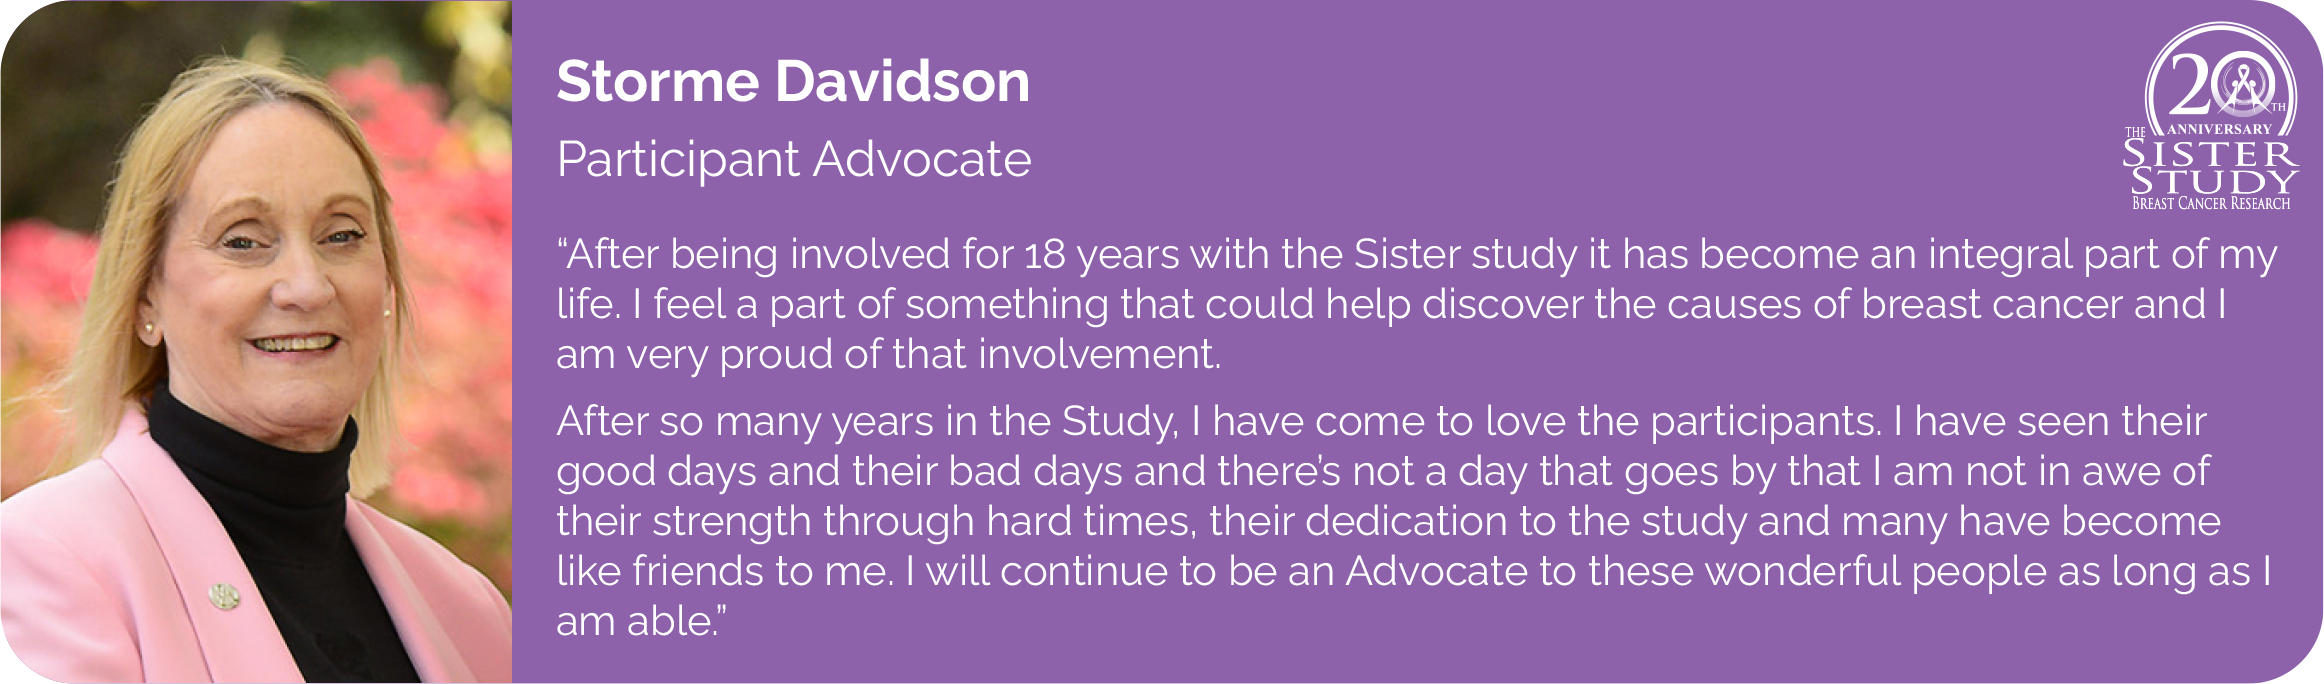 Storme Davidson
Participant Advocate
- After being involved for 18 years with the Sister study it has become an integral part of my life. I feel a part of something that could help discover the causes of breast cancer and I am very proud of that involvement.
After so many years in the Study, I have come to love the participants. I have seen their good days and their bad days and there’s not a day that goes by that I am not in awe of
their strength through hard times, their dedication to the study and many have become like friends to me. I will continue to be an Advocate to these wonderful people as long as I am able.